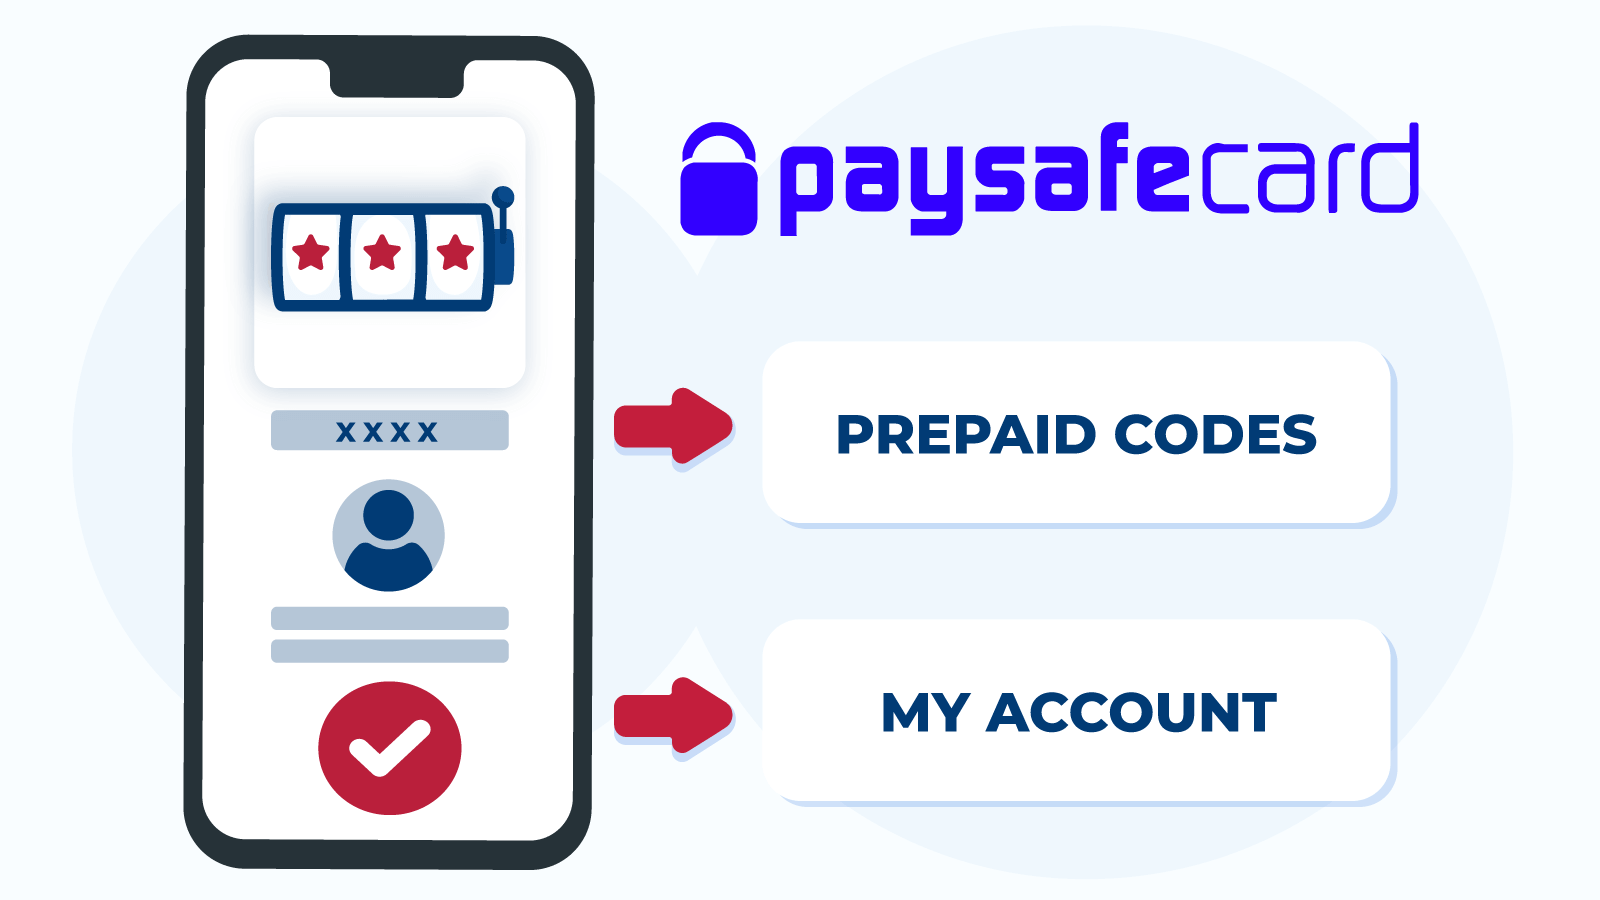 How to Start Using Paysafecard at Online Casinos